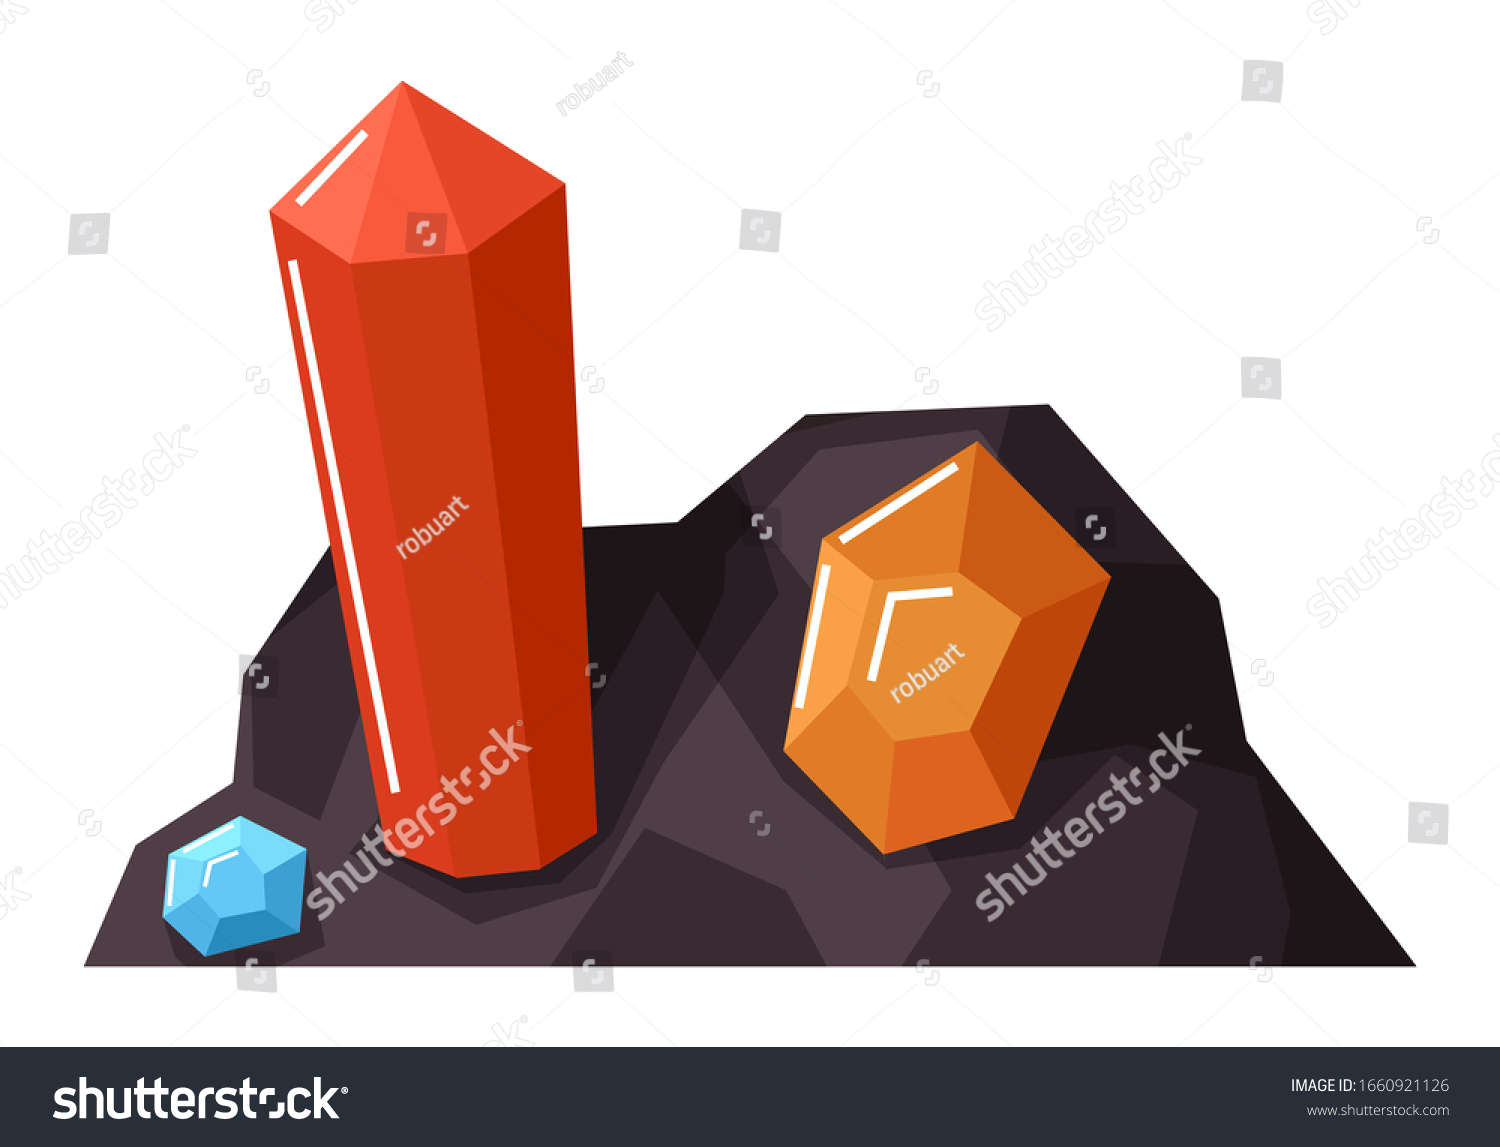 SVG of Colorful gemstones in ground isolated on white background. Red ruby, orange topaz and blue turquoise. Inside quarry, mining industry. Vector illustration of material extraction in flat style svg